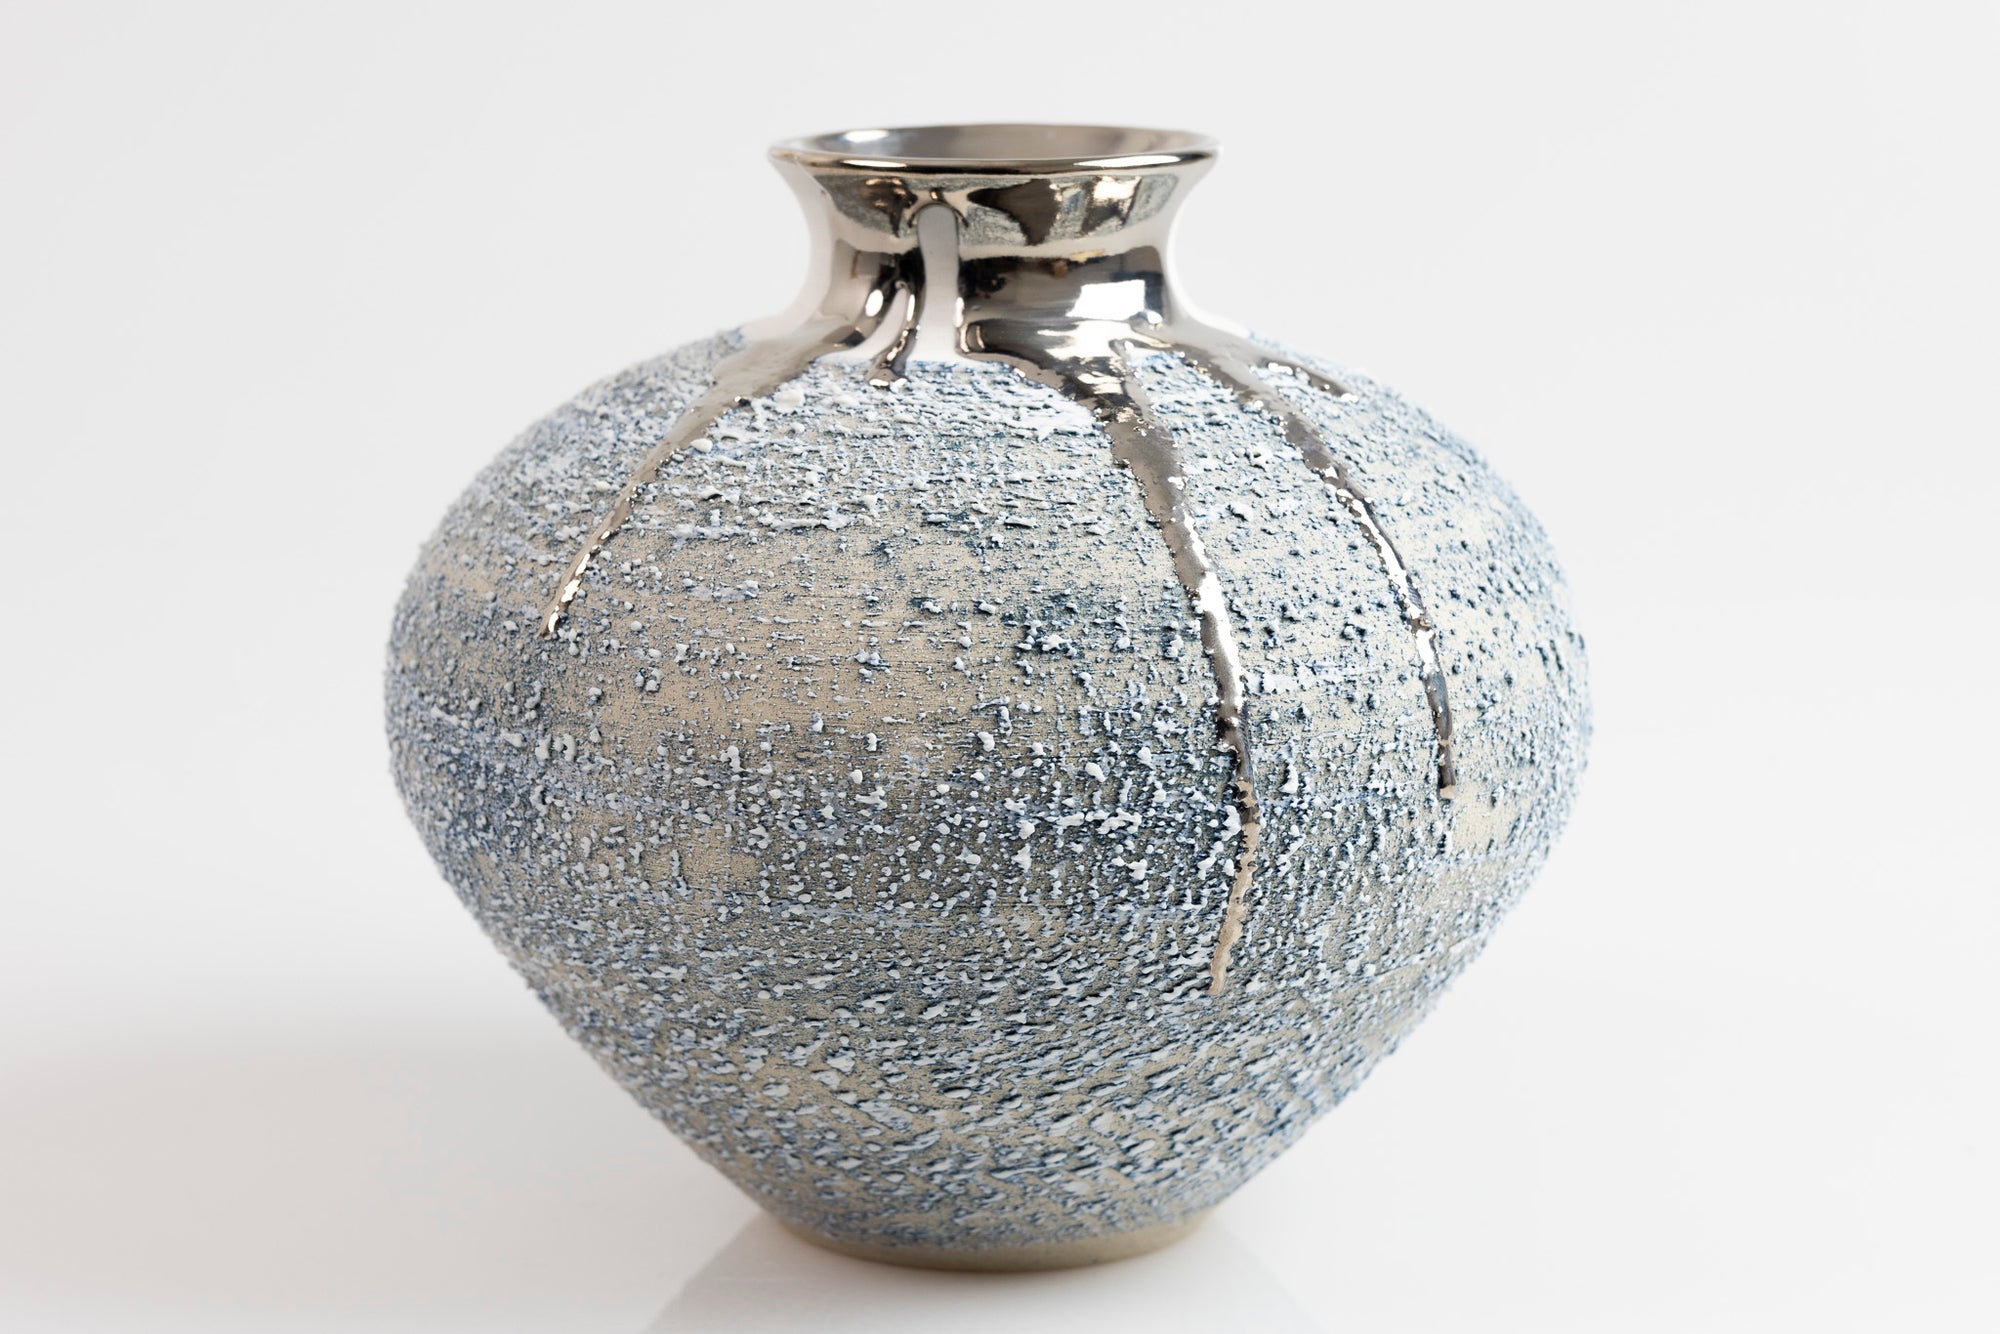 Textured vase with platinum lustre, by Alex McCarthy, available from Padstow Gallery, Cornwall